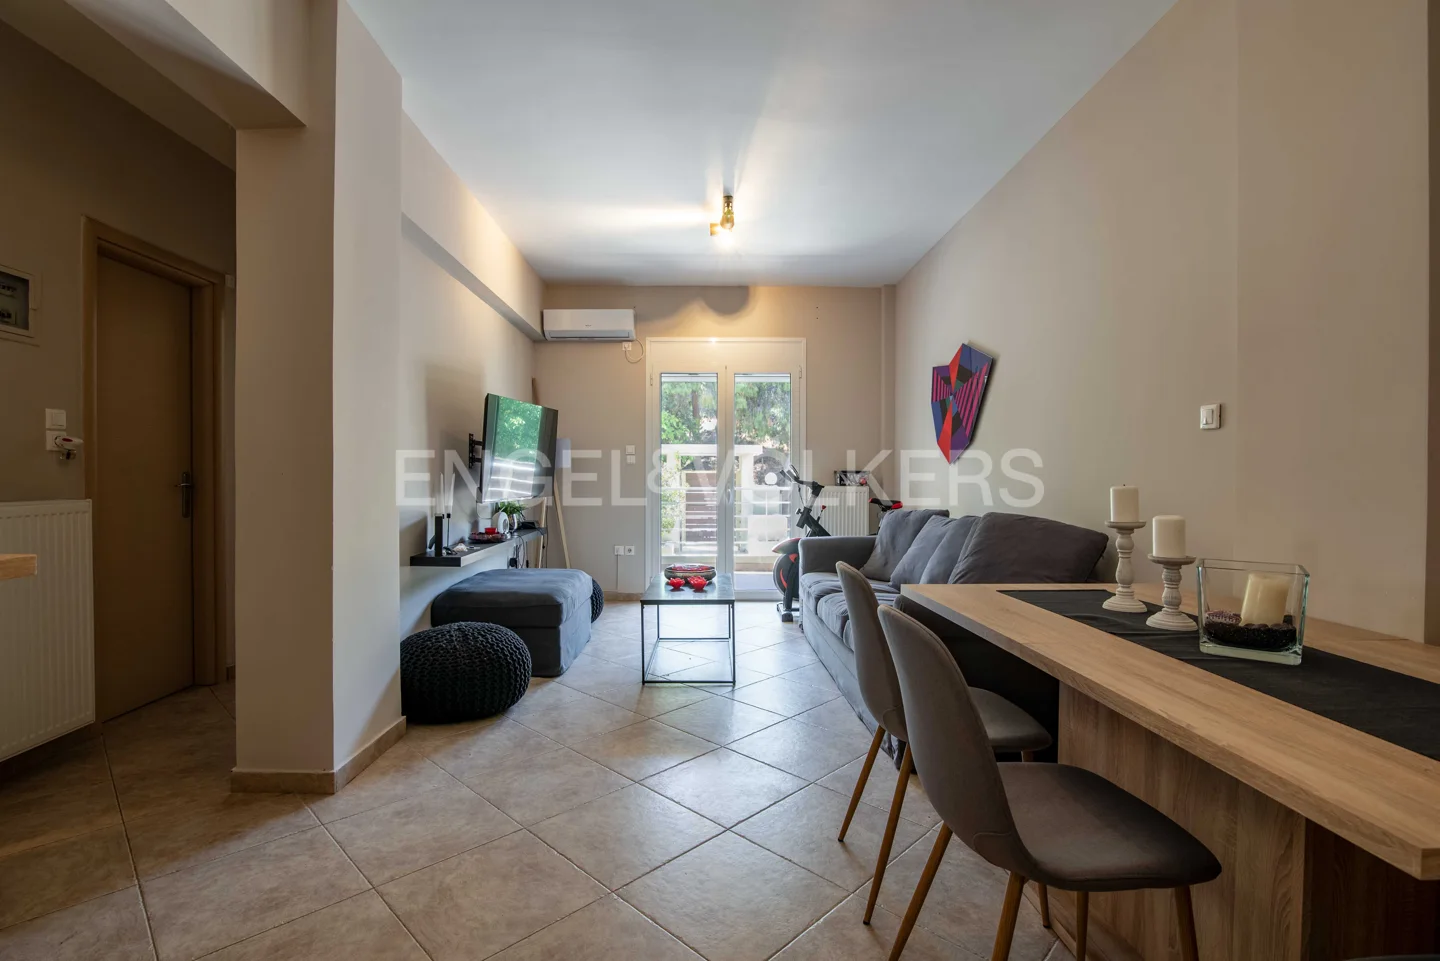 ONE BEDROOM INVESTMENT APARTMENT IN VOULIAGMENI Ι